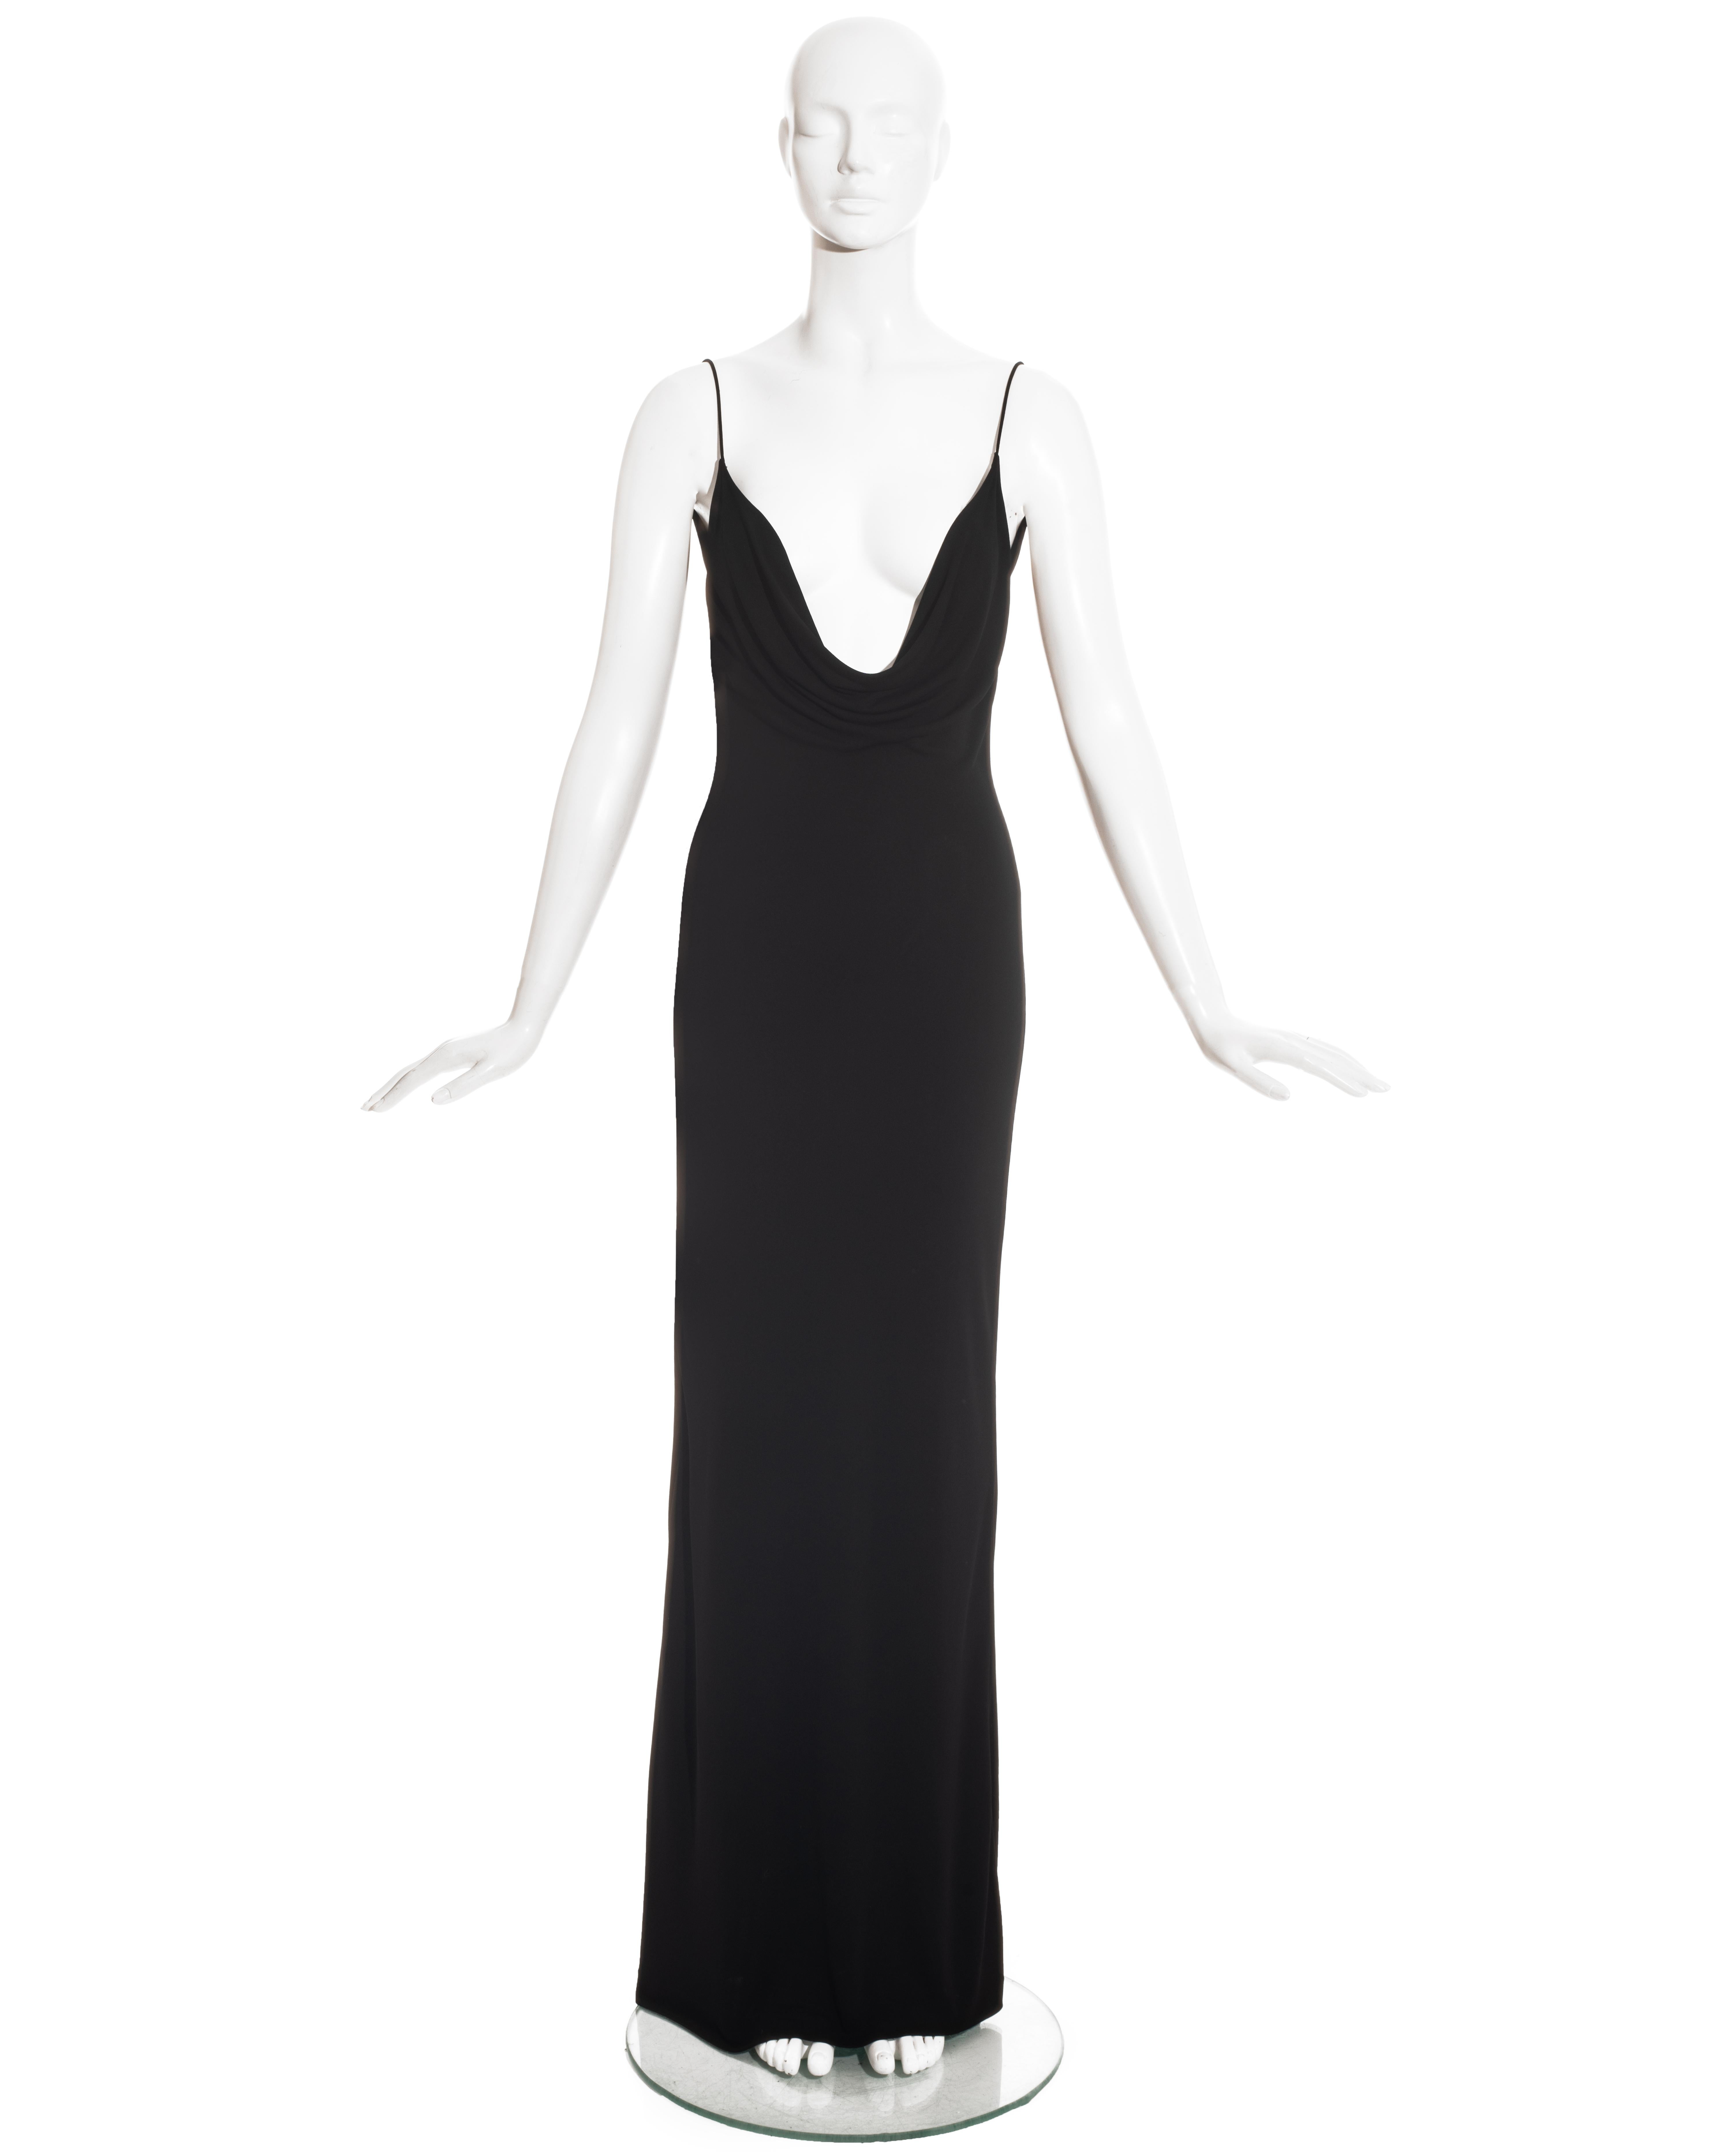 Gucci by Tom Ford black rayon jersey maxi dress with spaghetti straps and low-plunge cowl neckline. 

Fall-Winter 1997